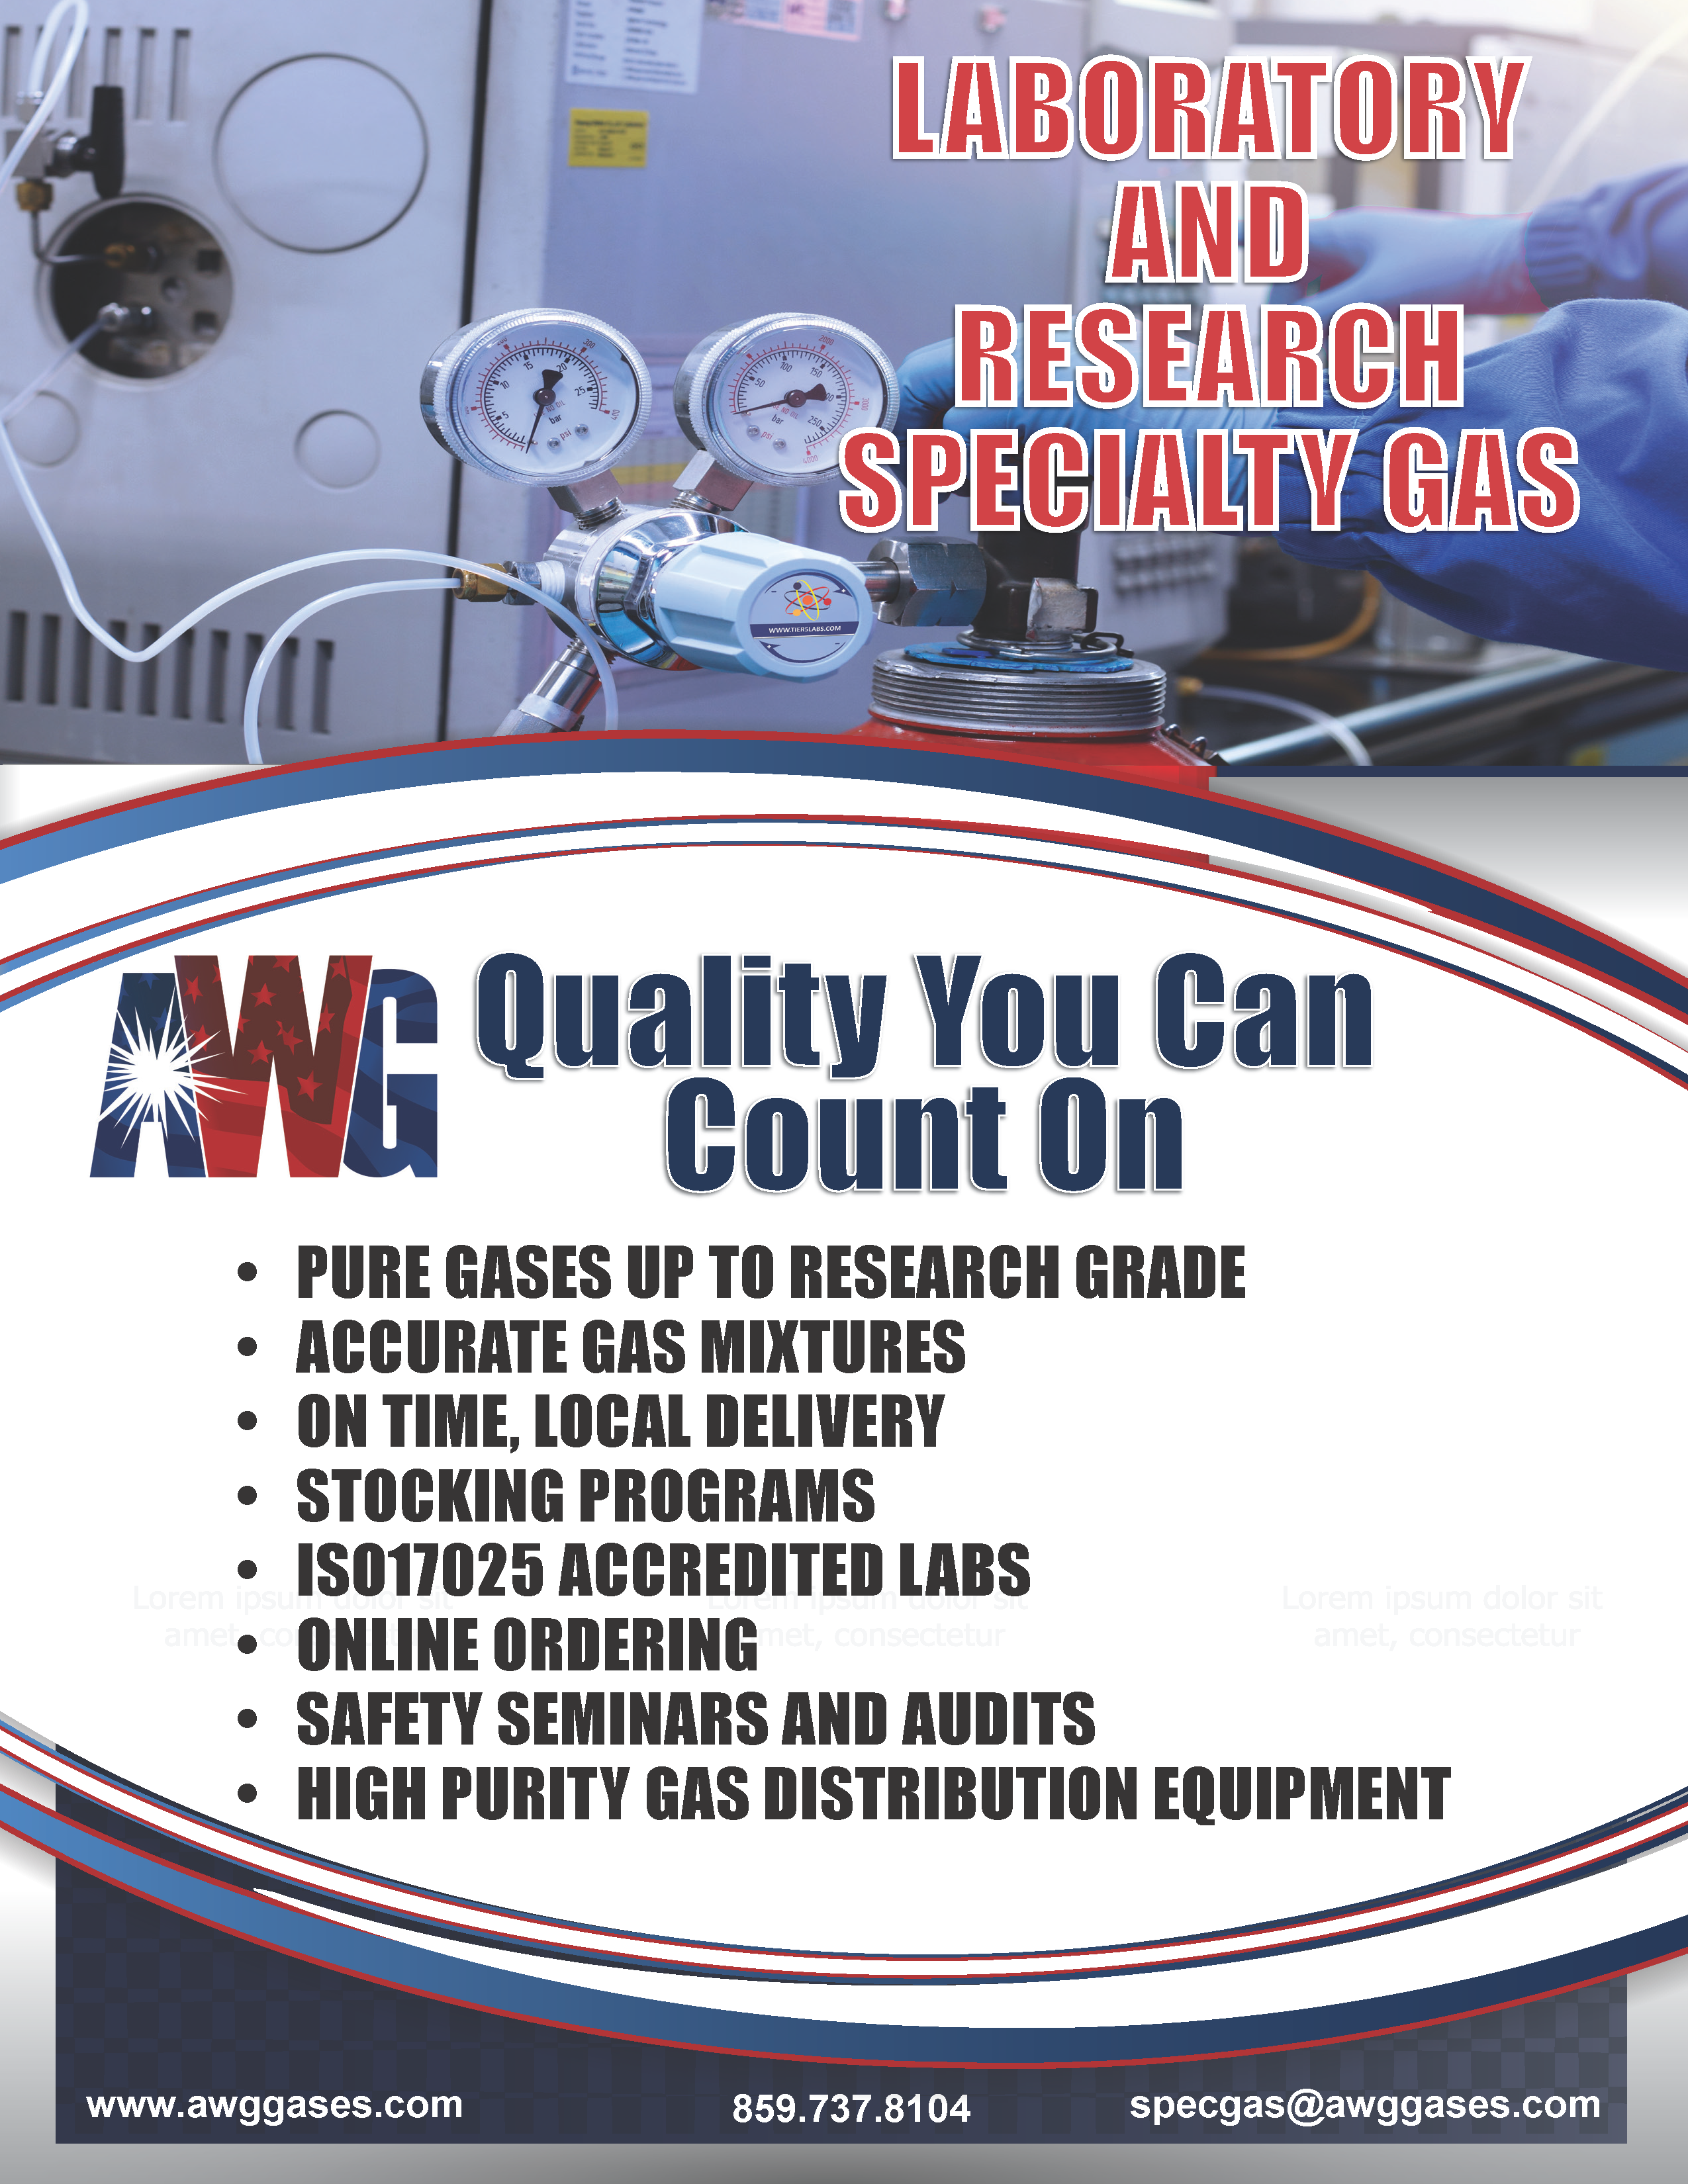 AWG Lab and Research